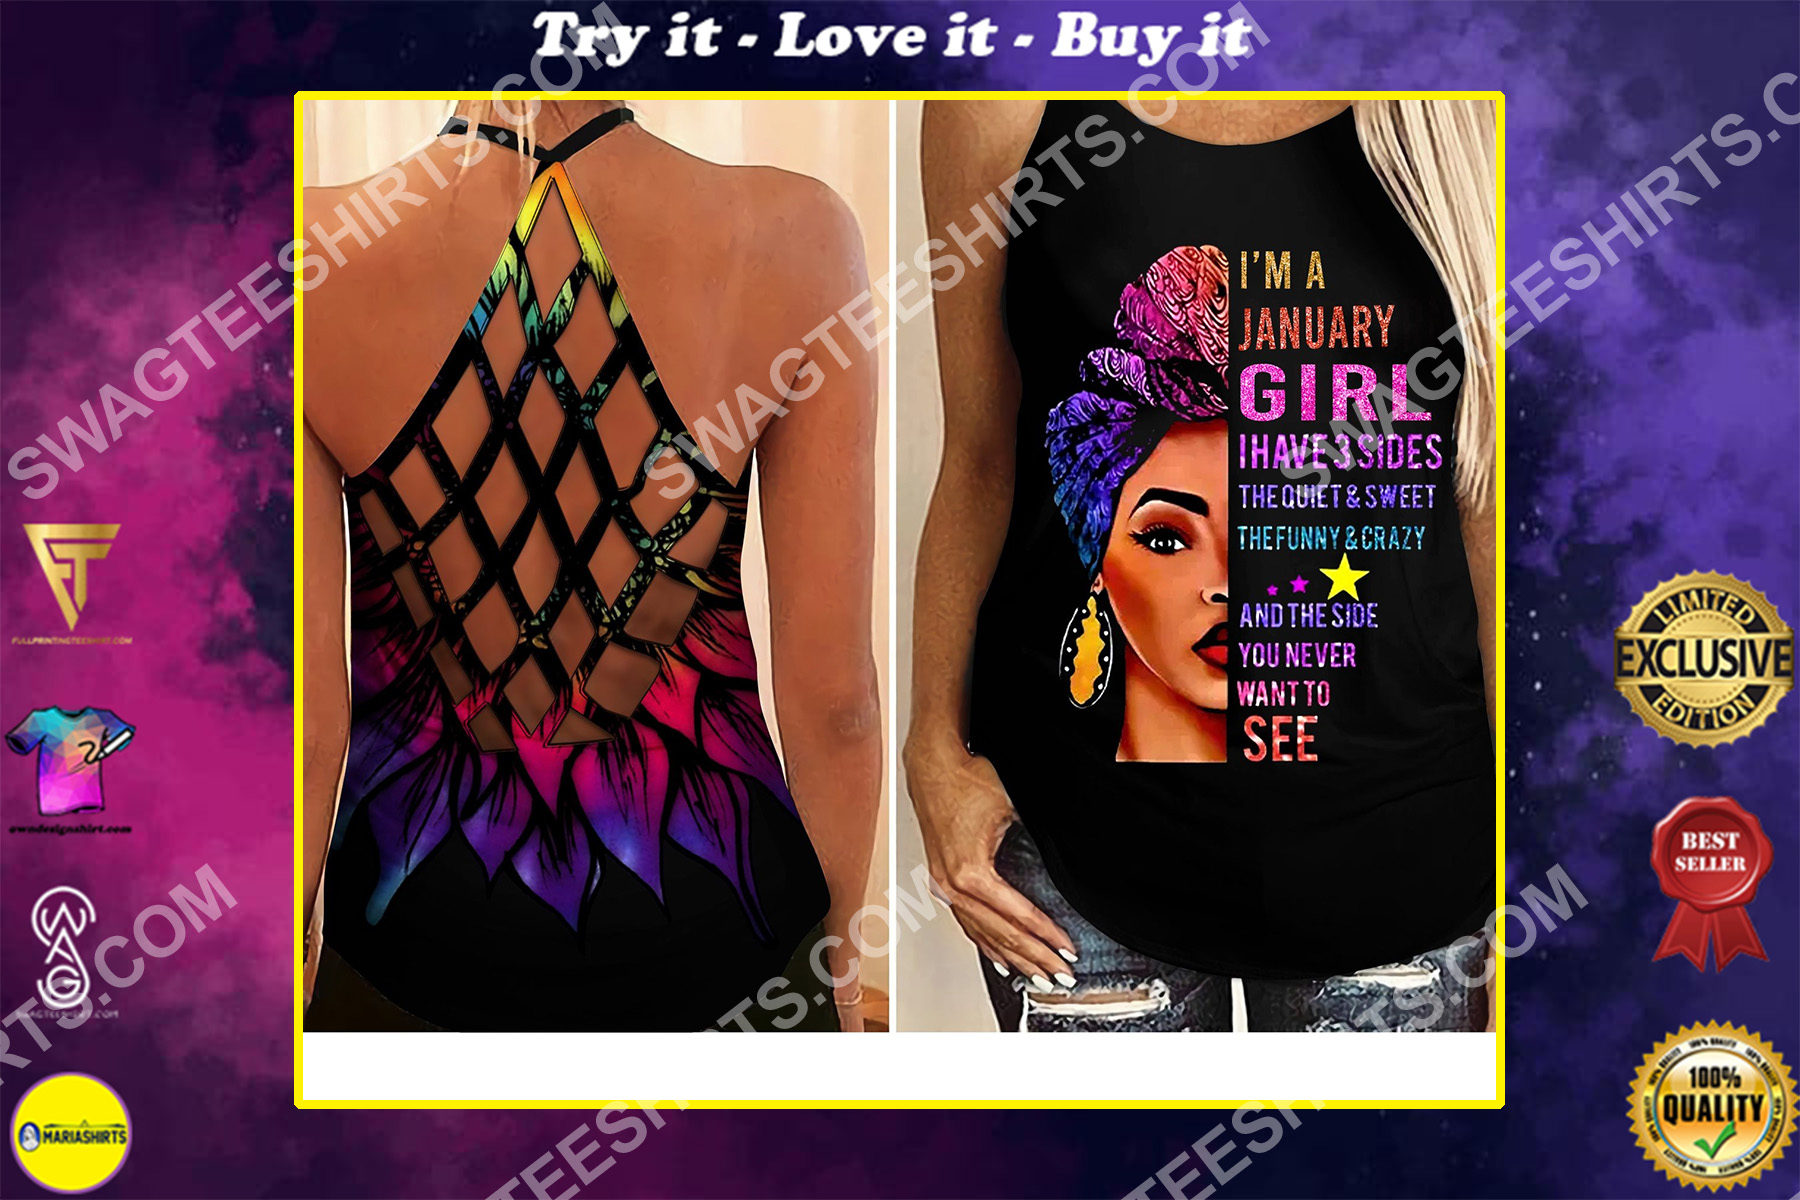 i'm a january girl i have 3 sides the quiet and sweet all over printed criss-cross tank top